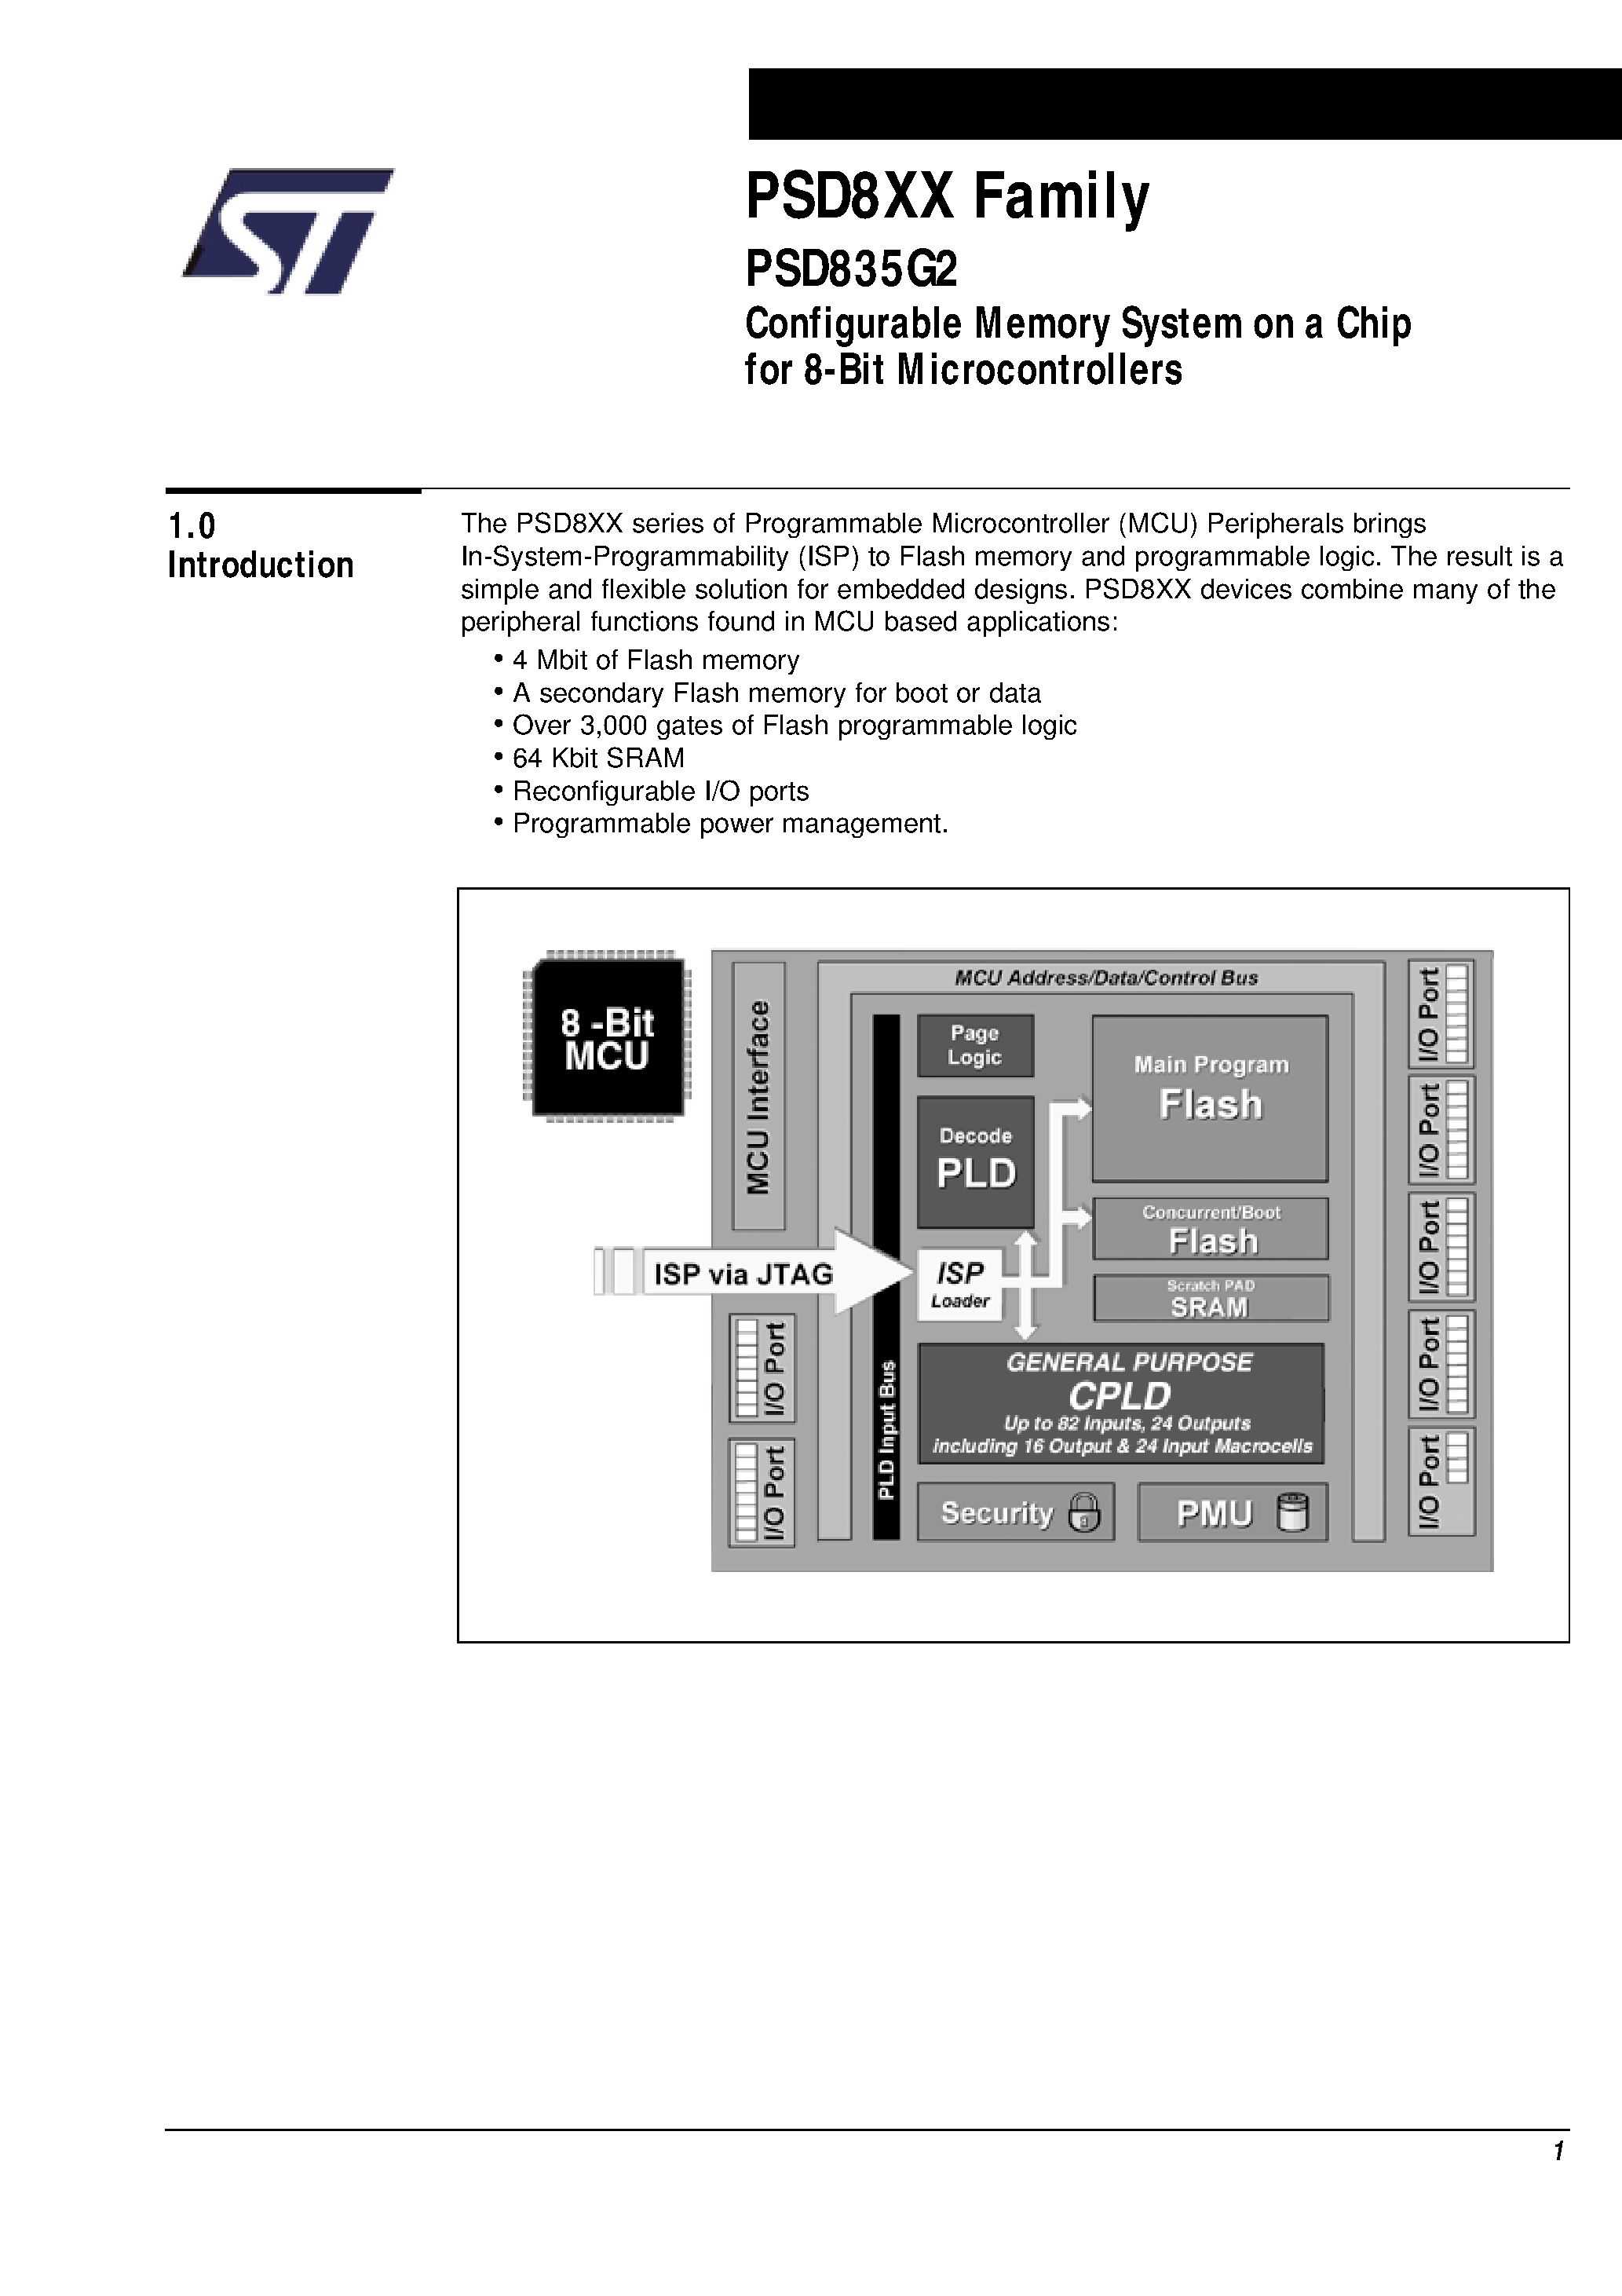 Datasheet PSD835F2V-A-20M - Configurable Memory System on a Chip for 8-Bit Microcontrollers page 2